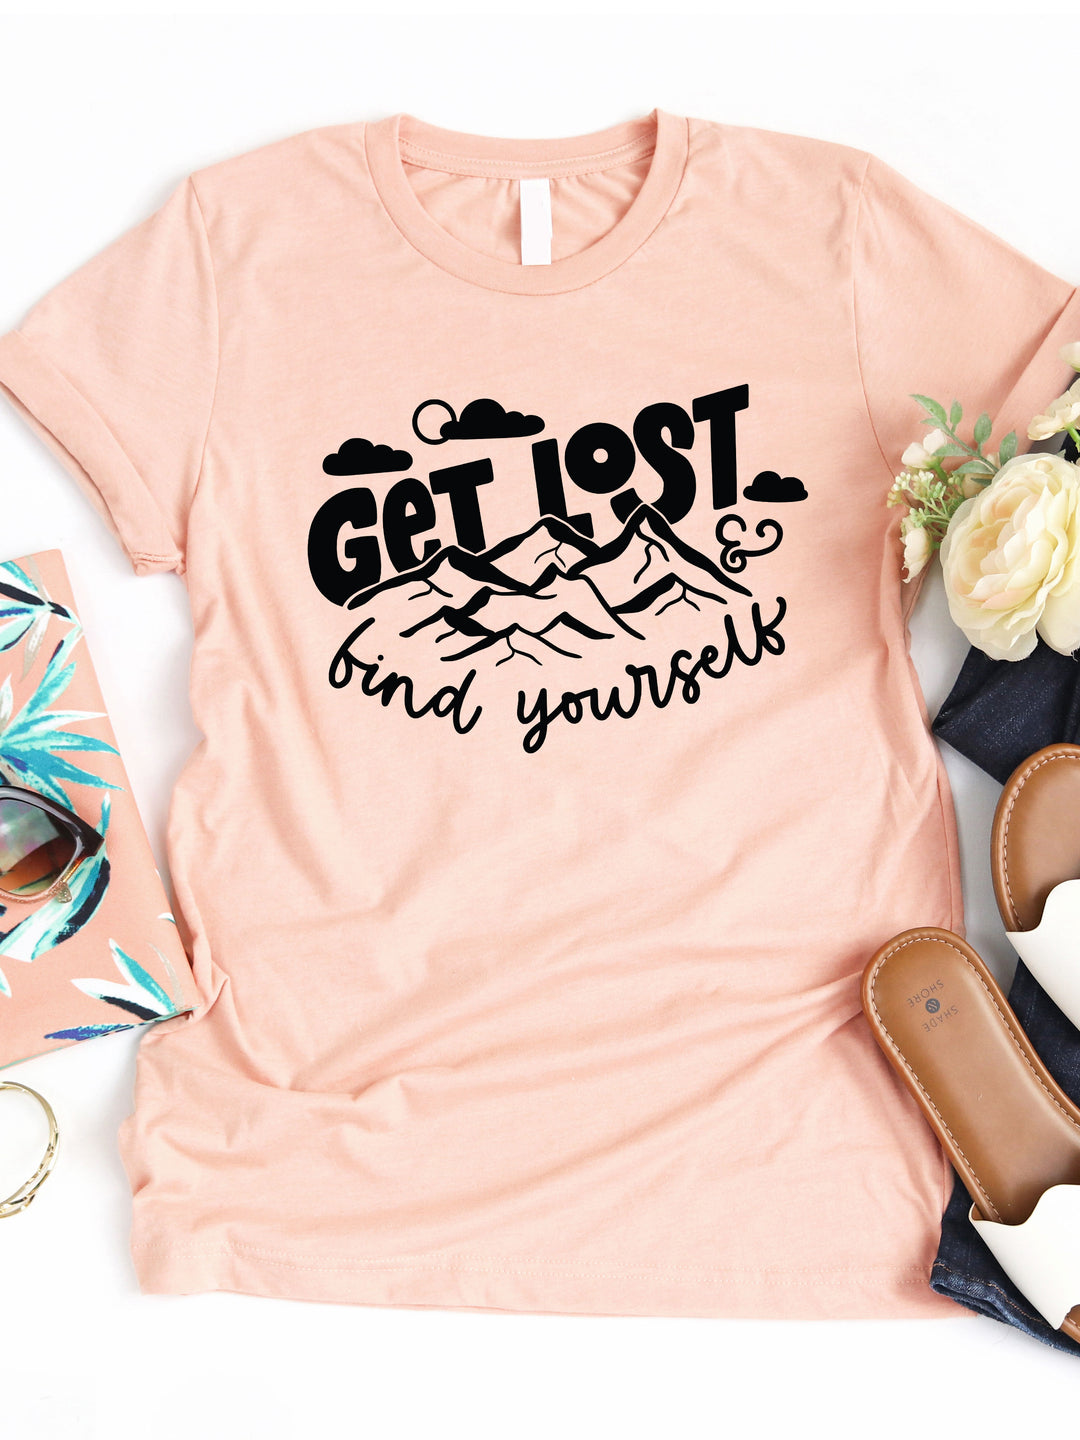 Get Lost, Find Yourself Graphic Tee